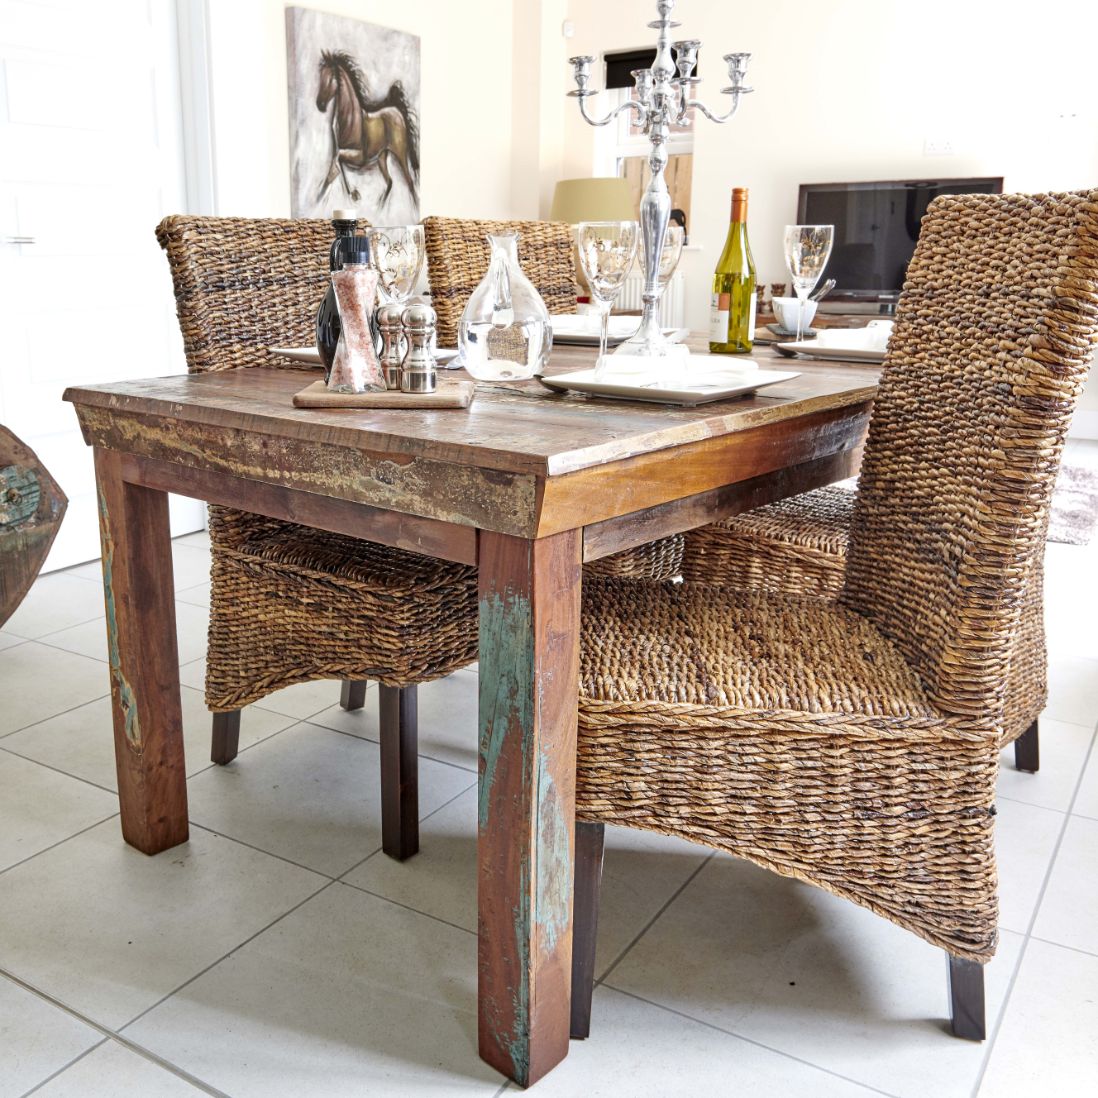 Wicker And Wood Dining Chairs : Shop wicker dining room chairs and ...